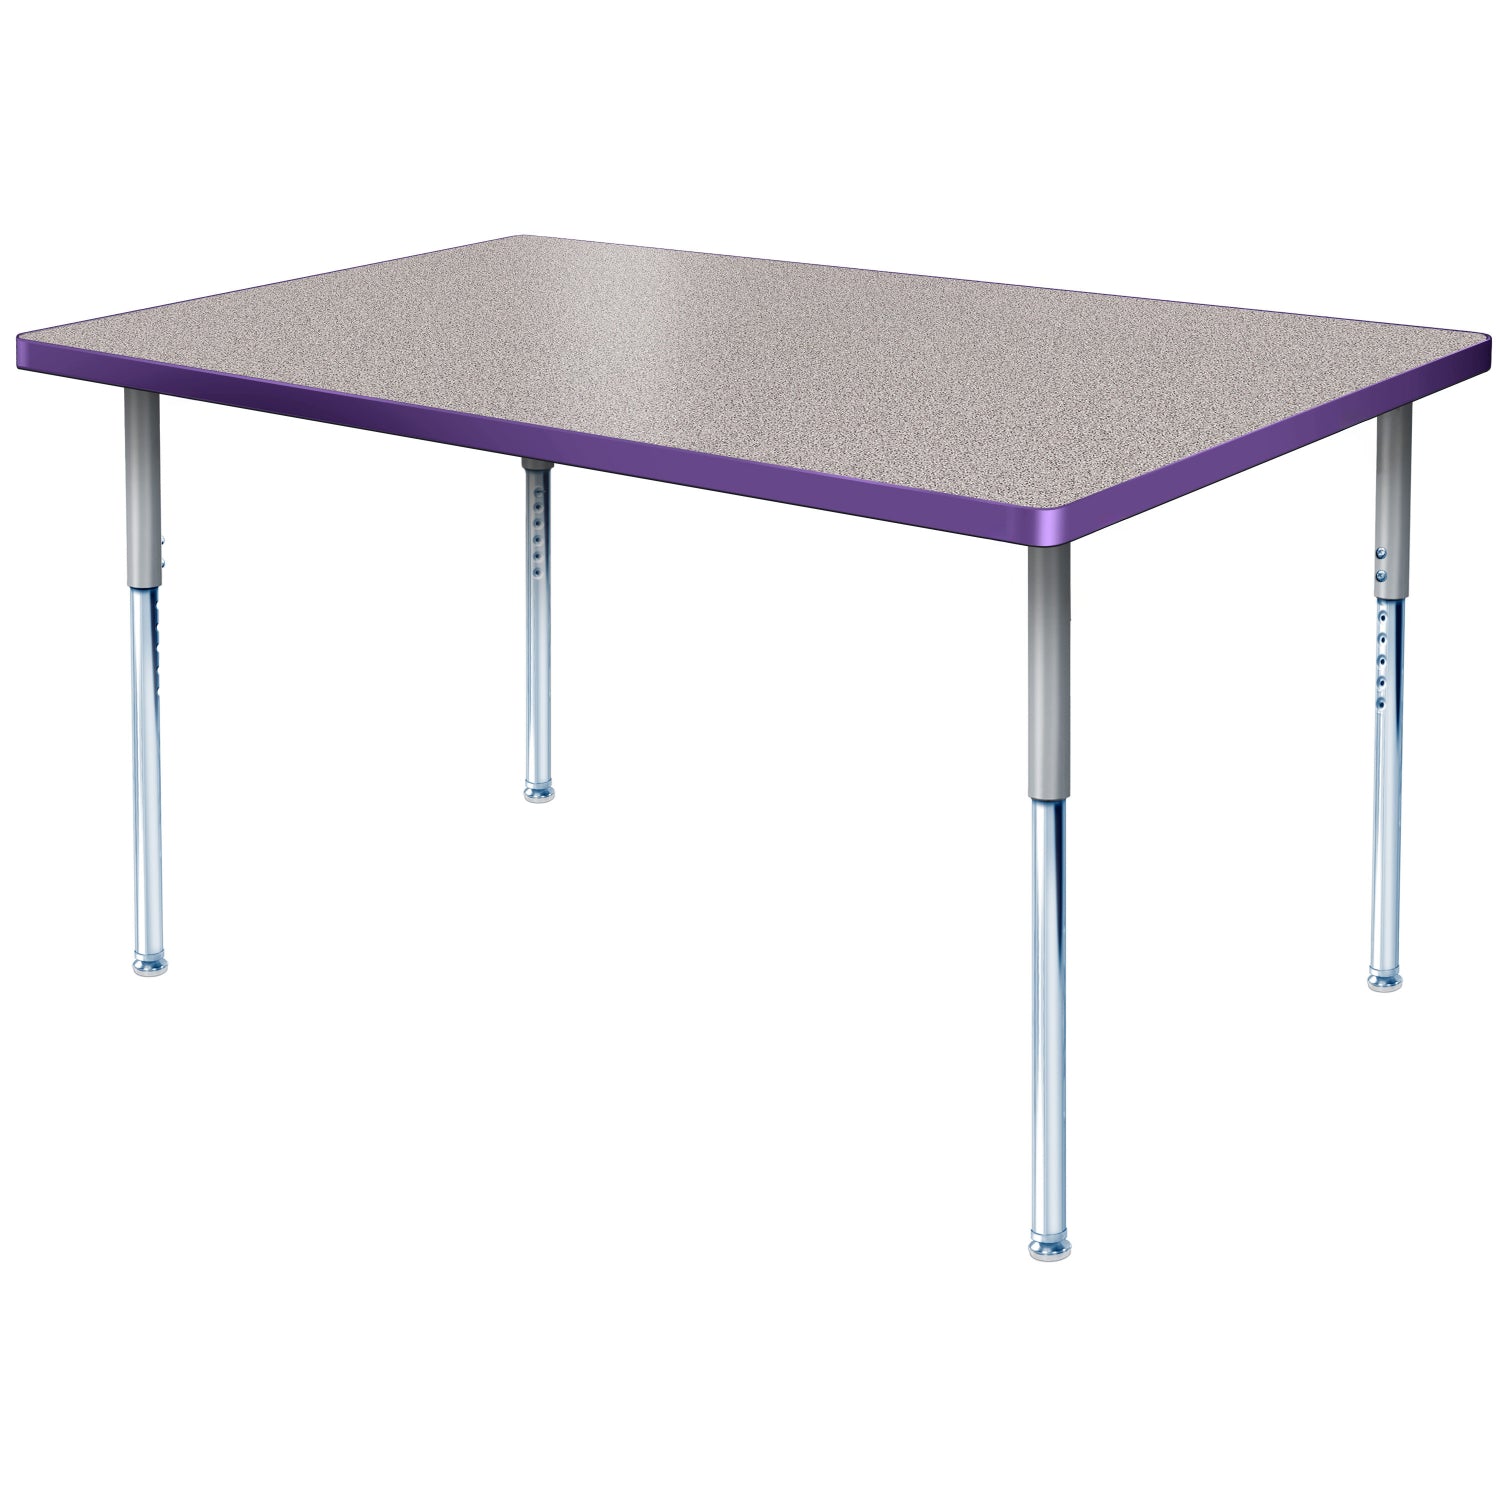 Modern Classic Series 24 x 48" Rectangular Activity Table with High Pressure Laminate Top, Adjustable Height Legs